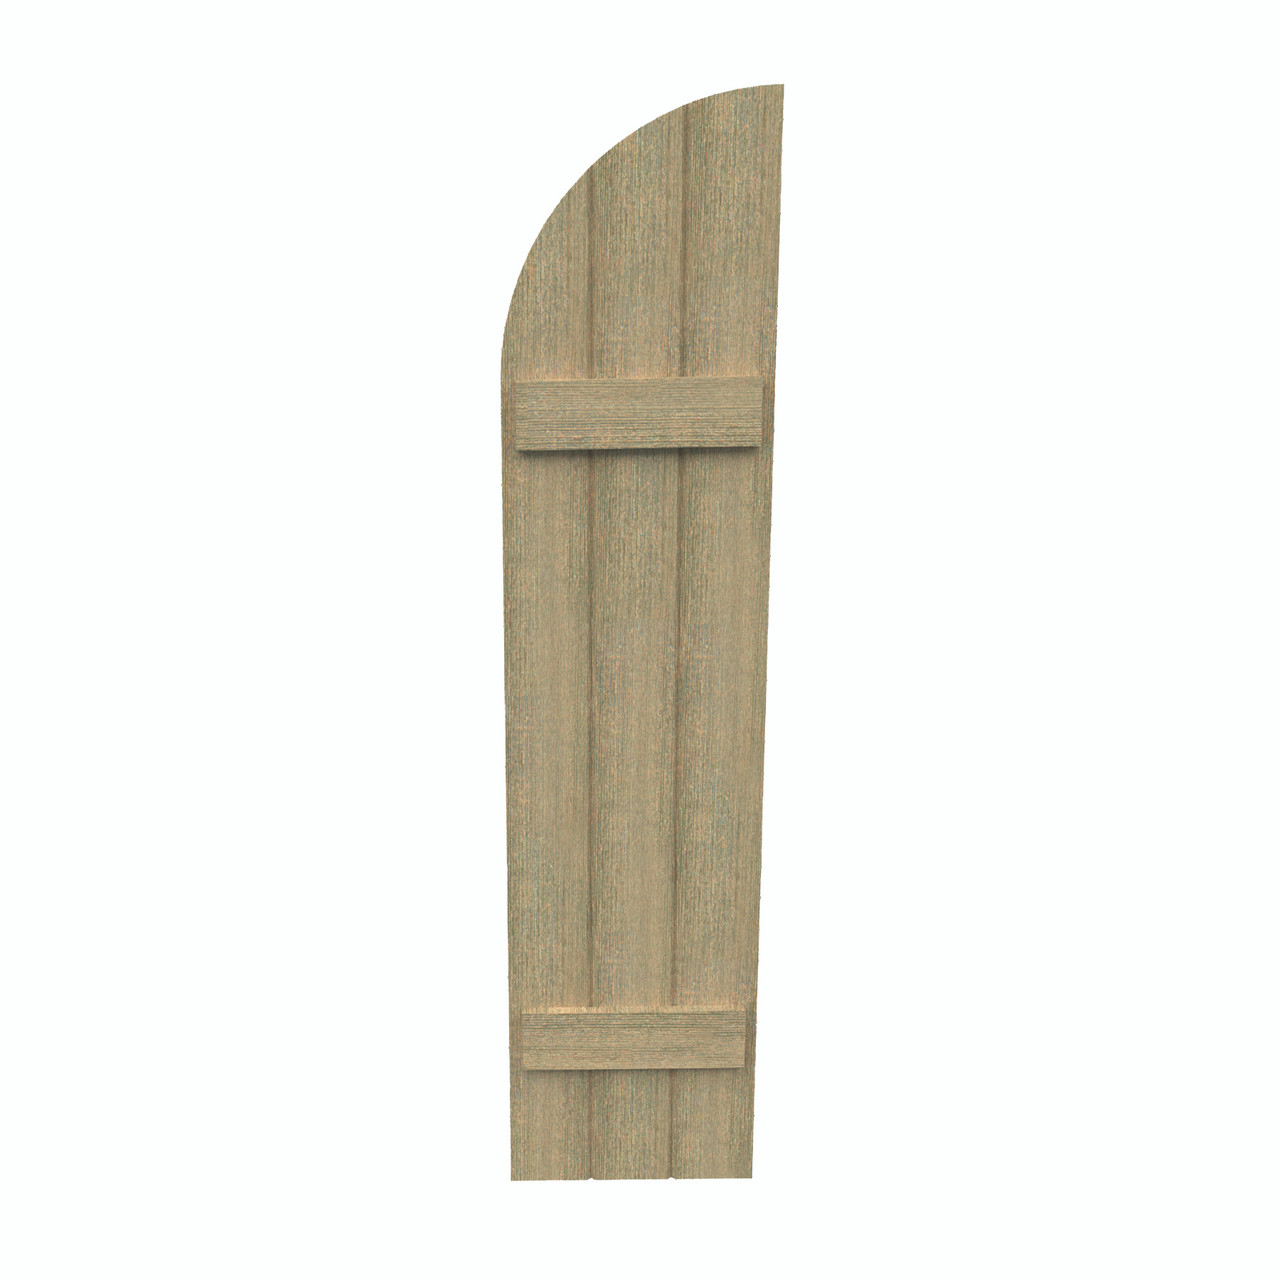 14 inch by 67 inch Quarter Round Shutter with 3-Boards